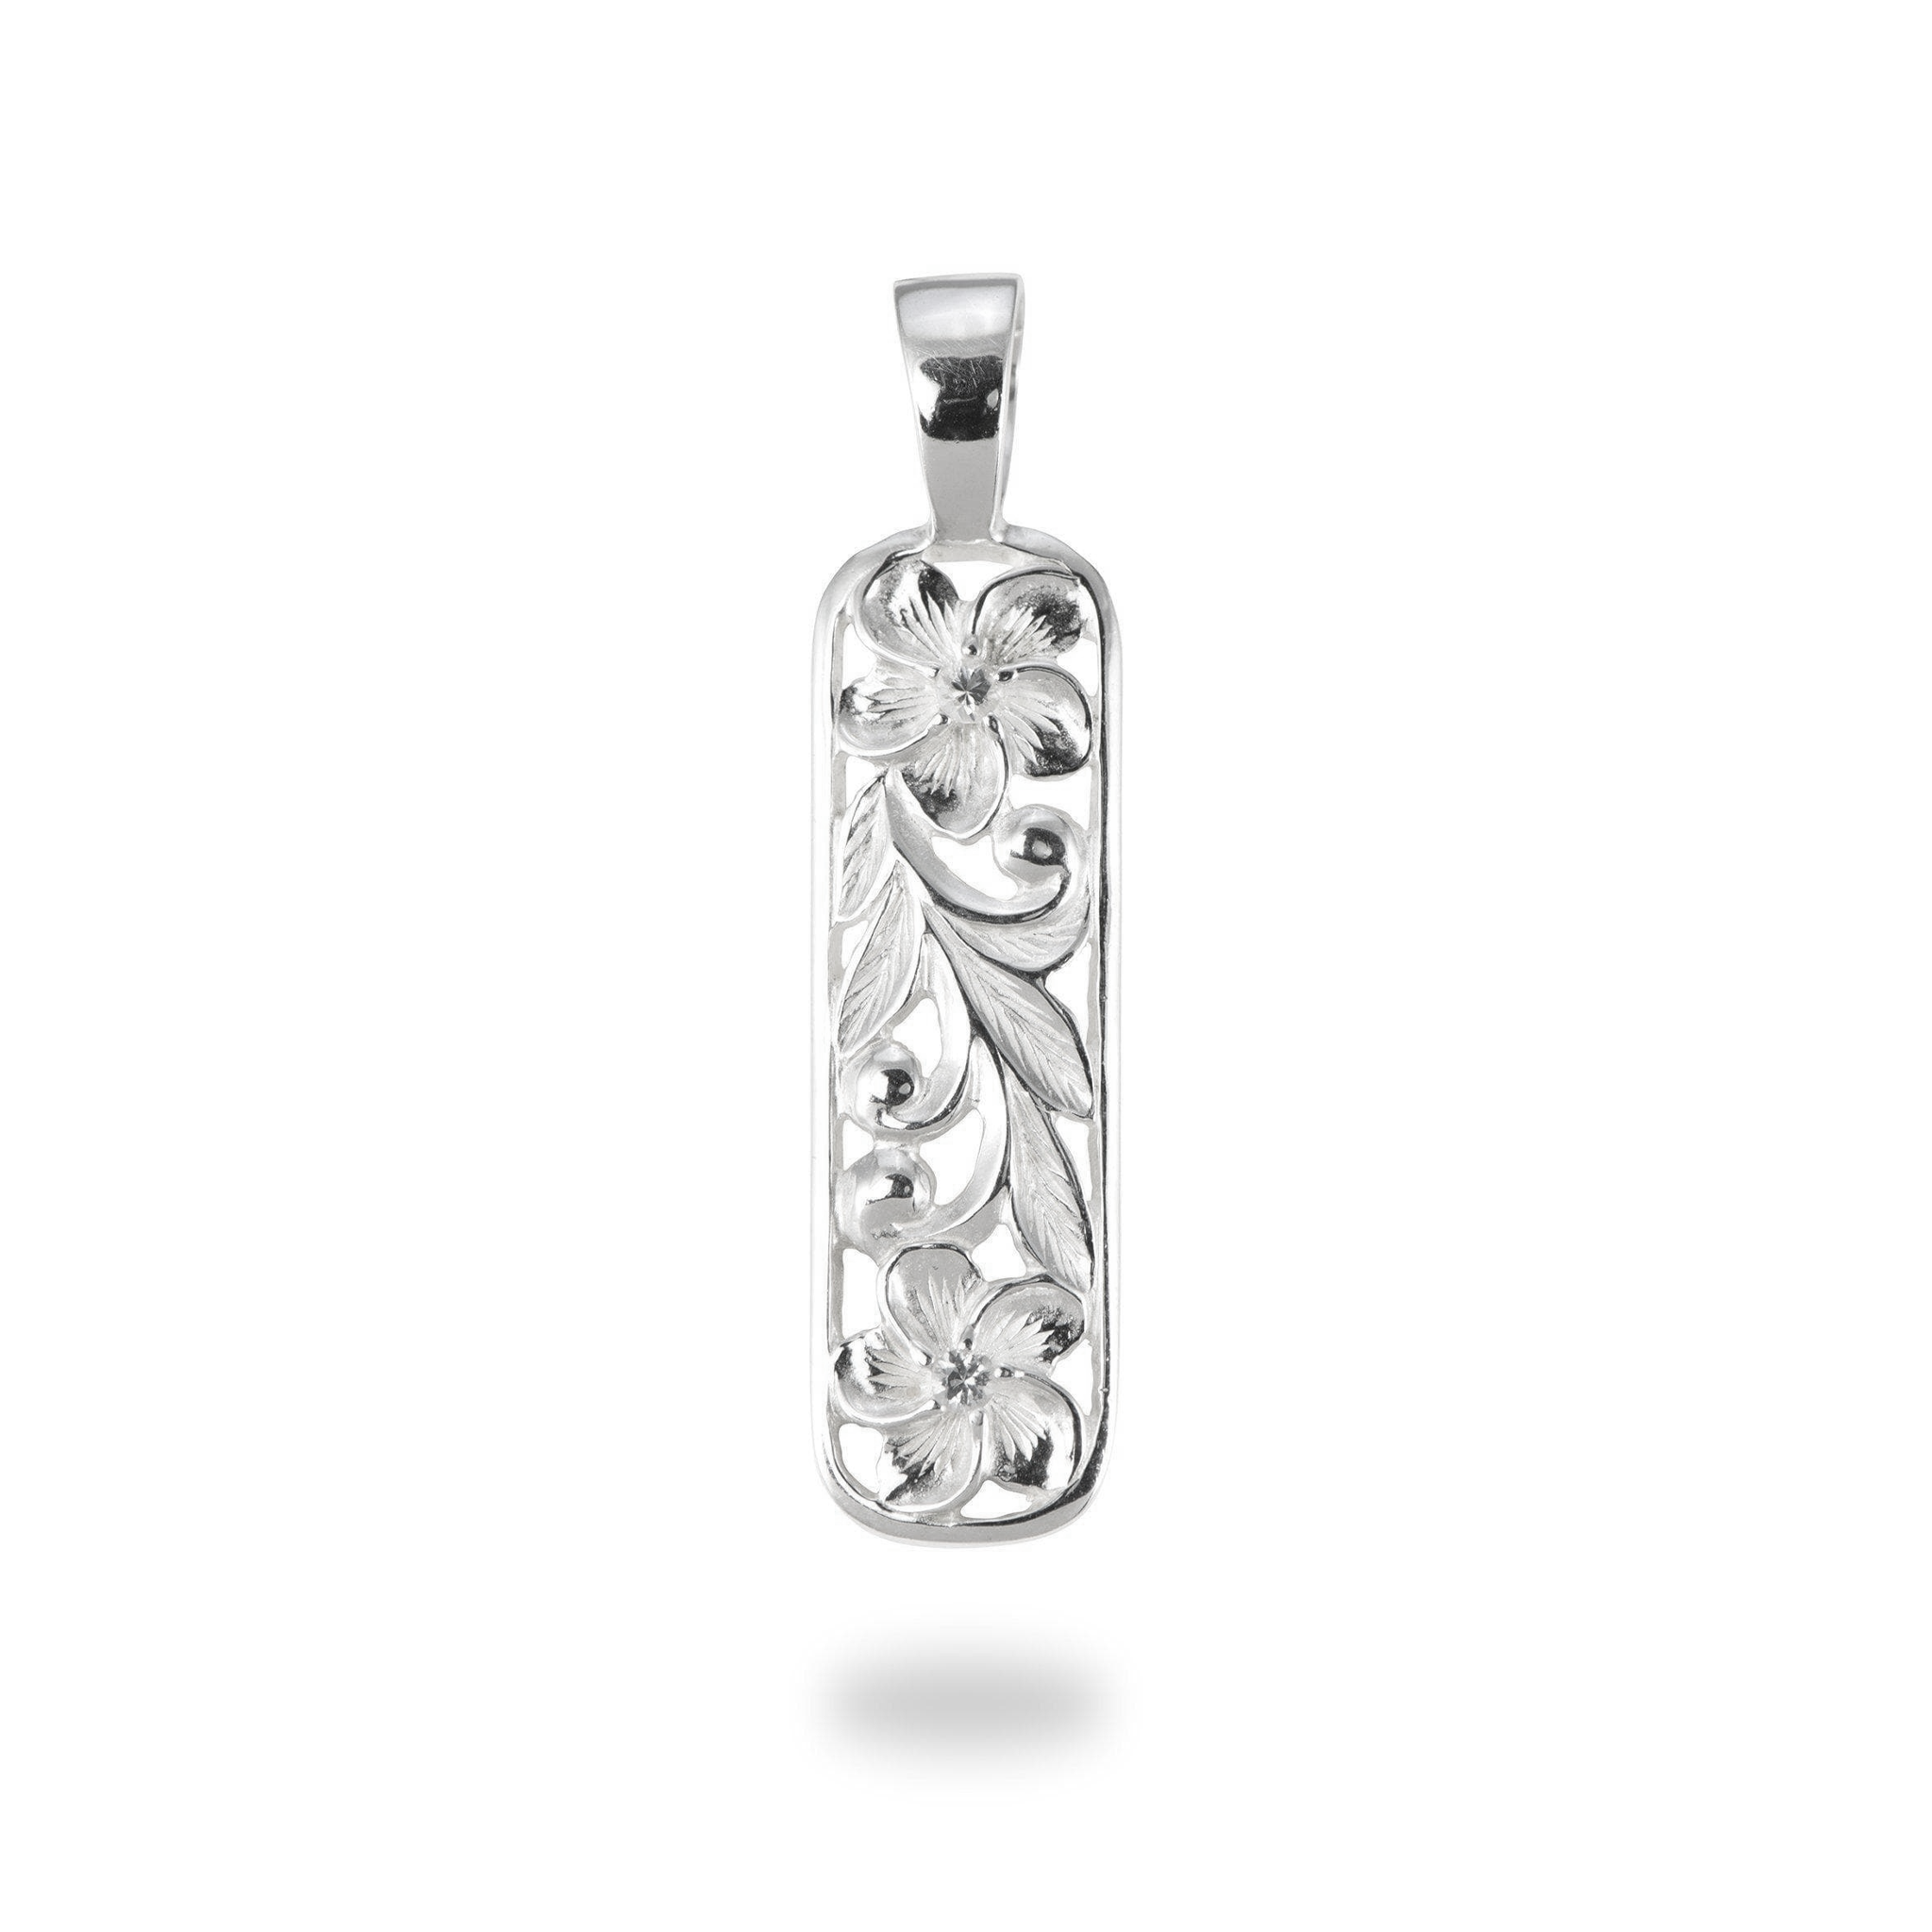 Hawaiian Heirloom Plumeria Pendant in Sterling Silver with White Sapphire - 41mm